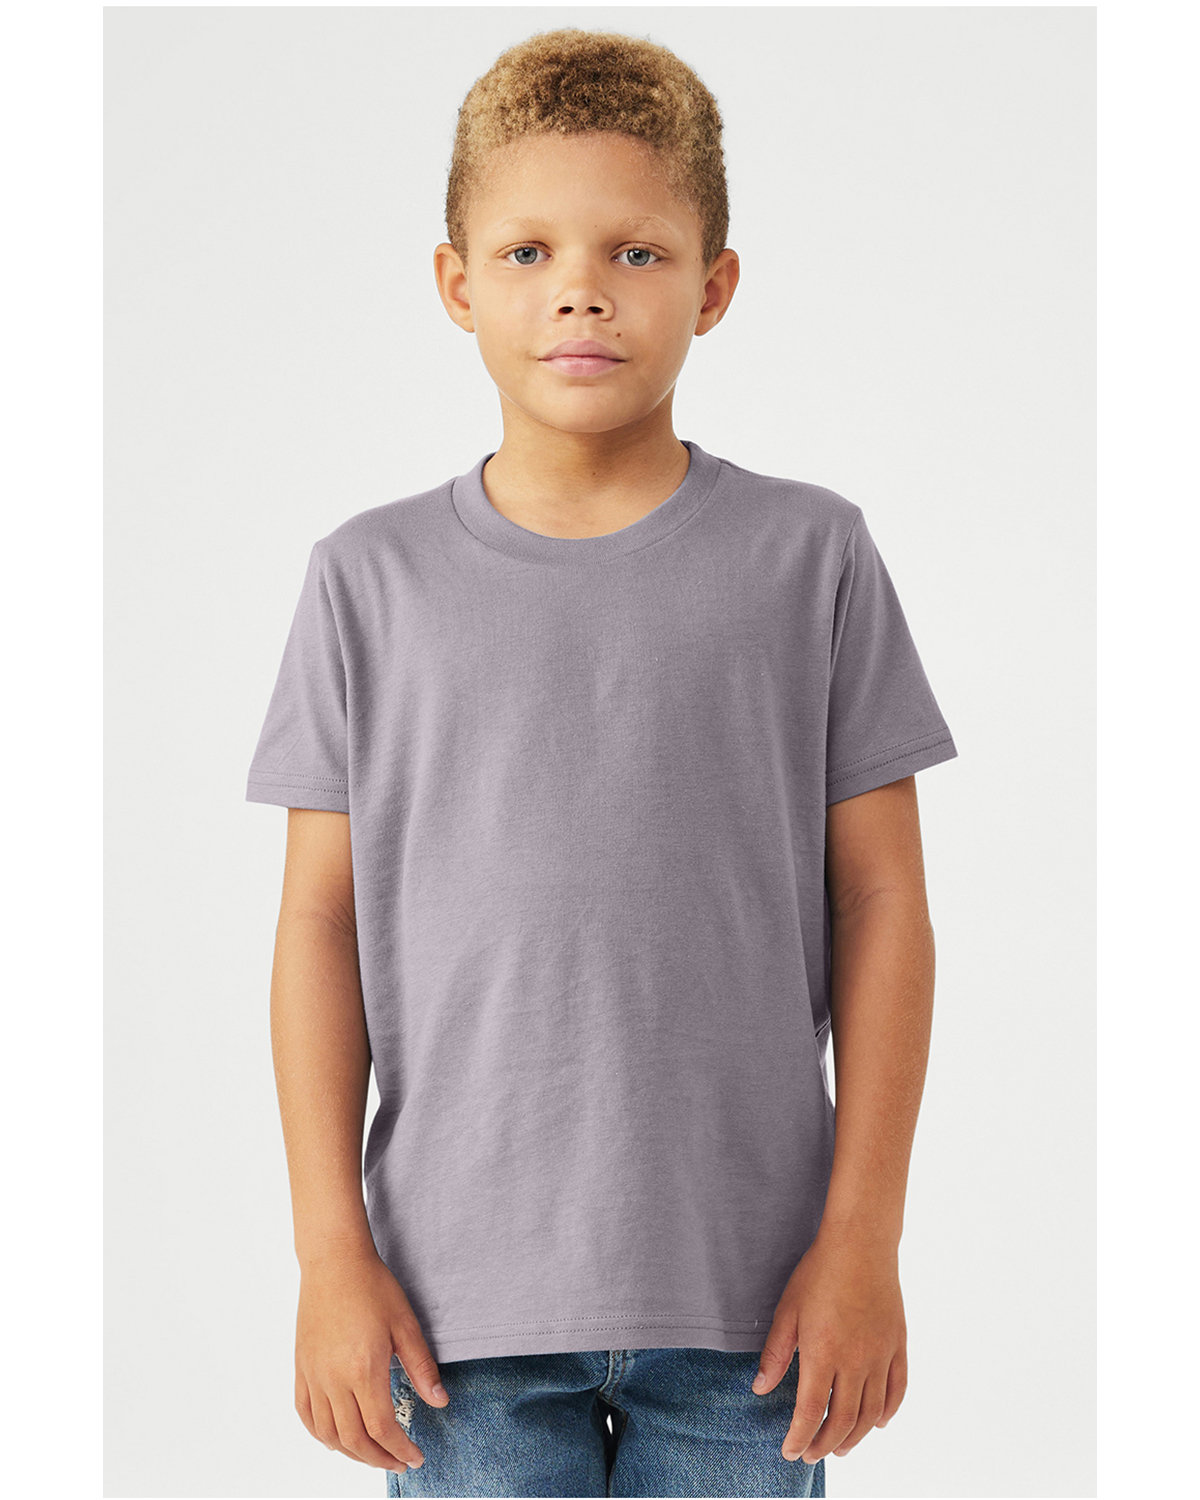 Bella + Canvas Youth Jersey T-Shirt STORM 